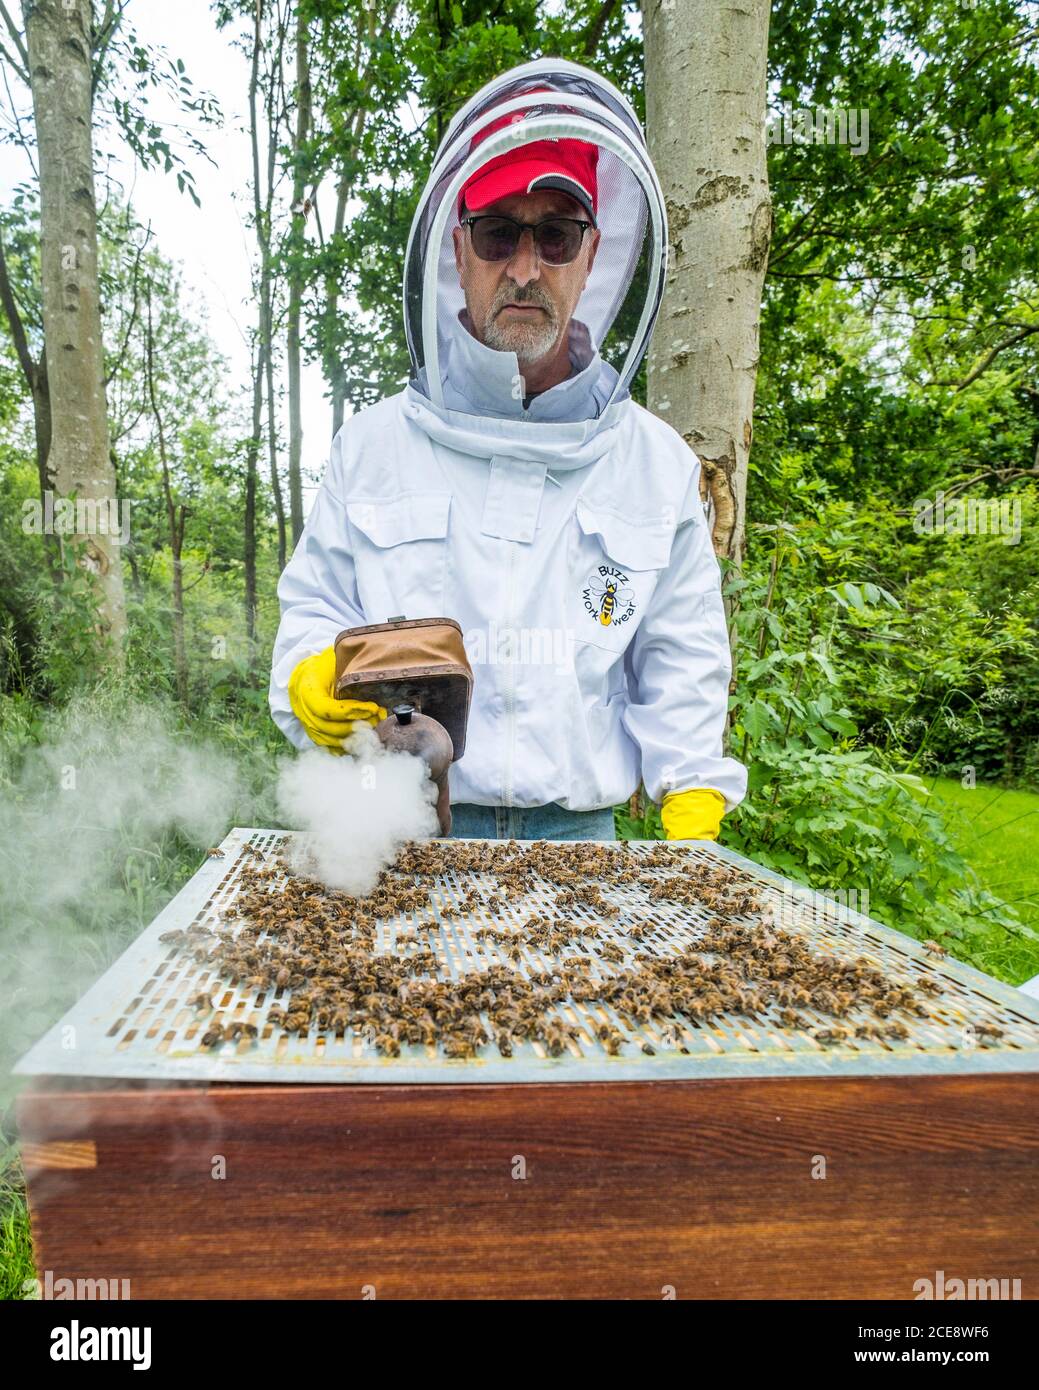 A beekeeper uses a smoker to quiten the hive. Stock Photo